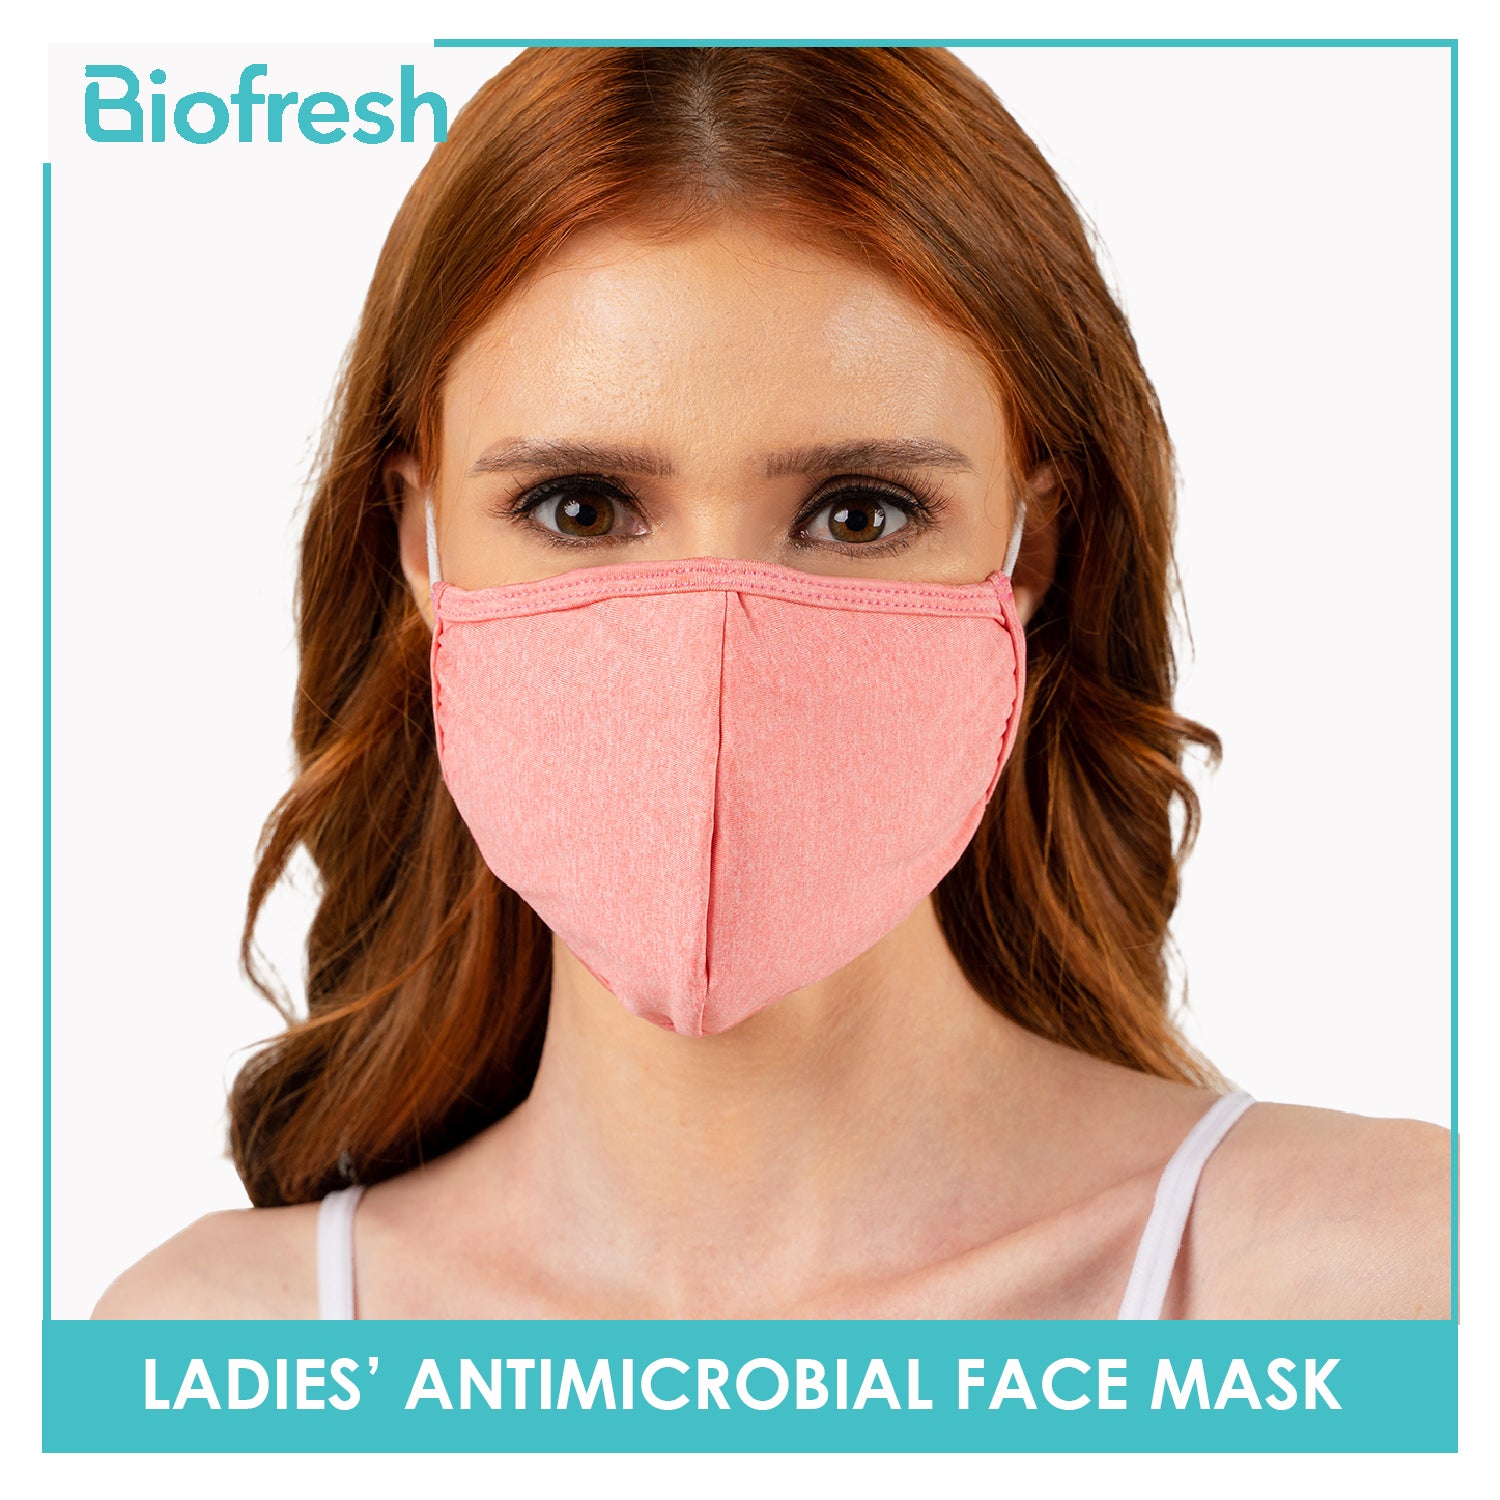 Ladies' Washable Anti-Microbial Face Mask by Biofresh